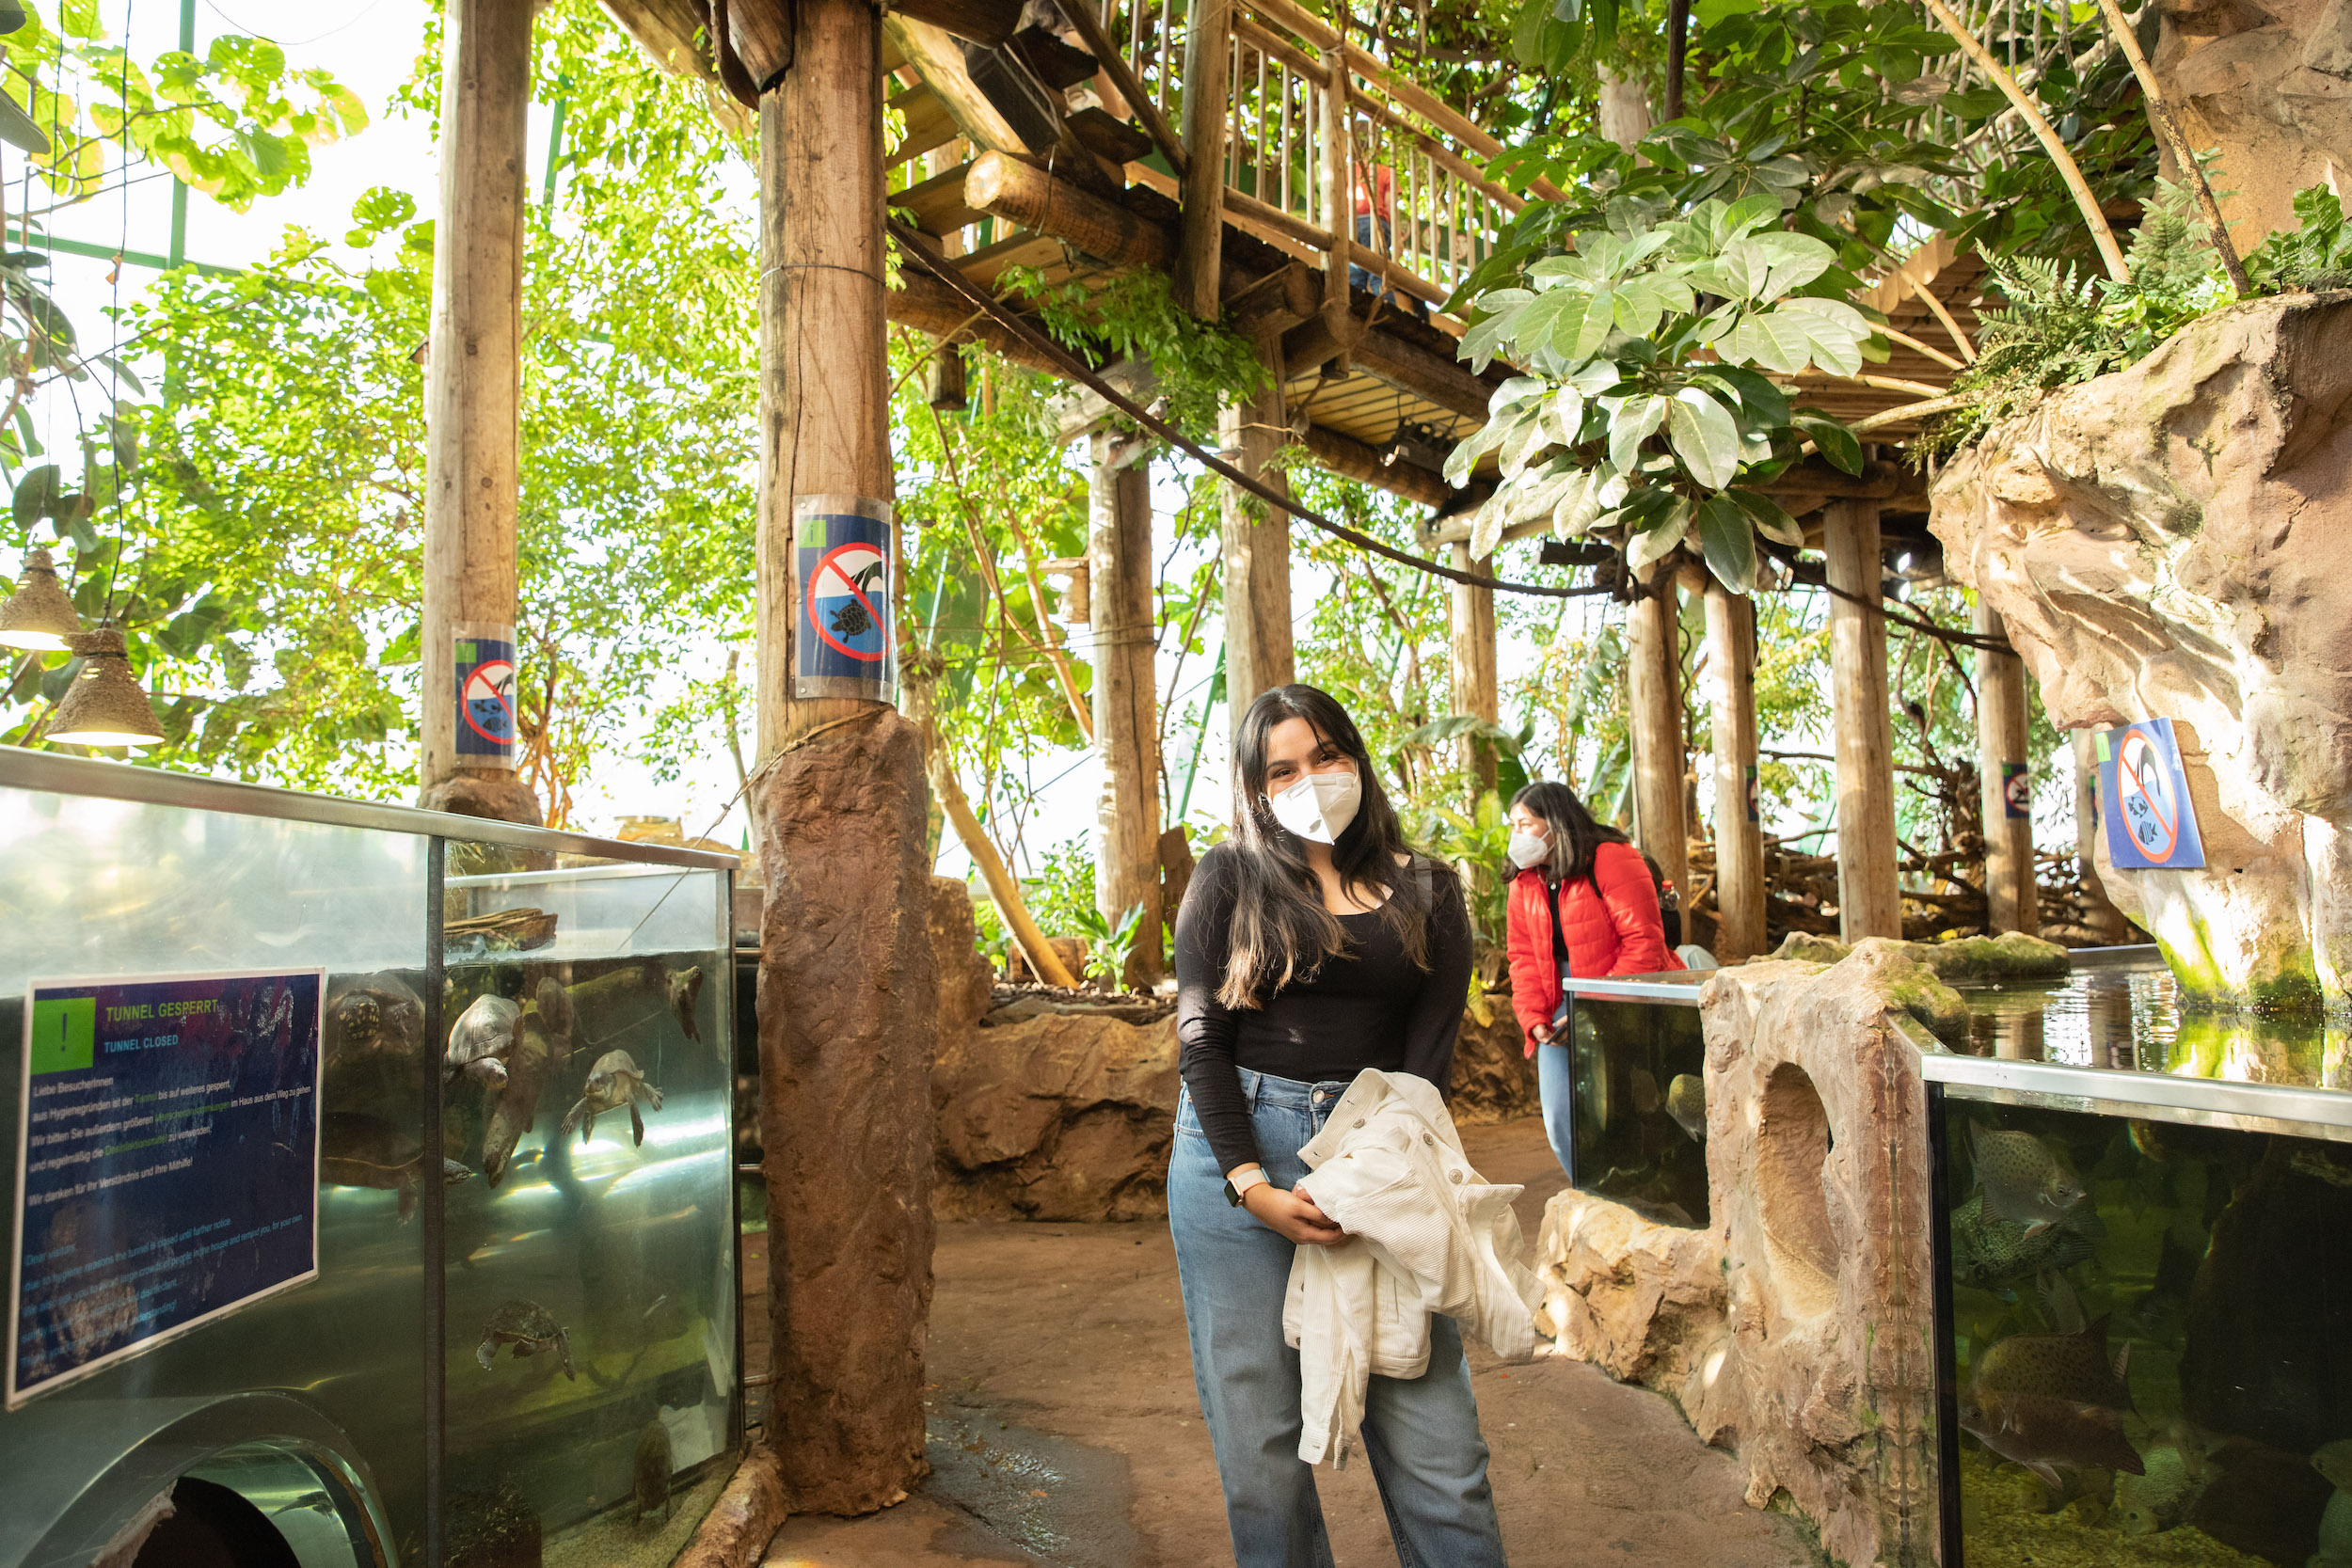 woman wearing face mask stands near trees, wooden pillars and tank with turtles 